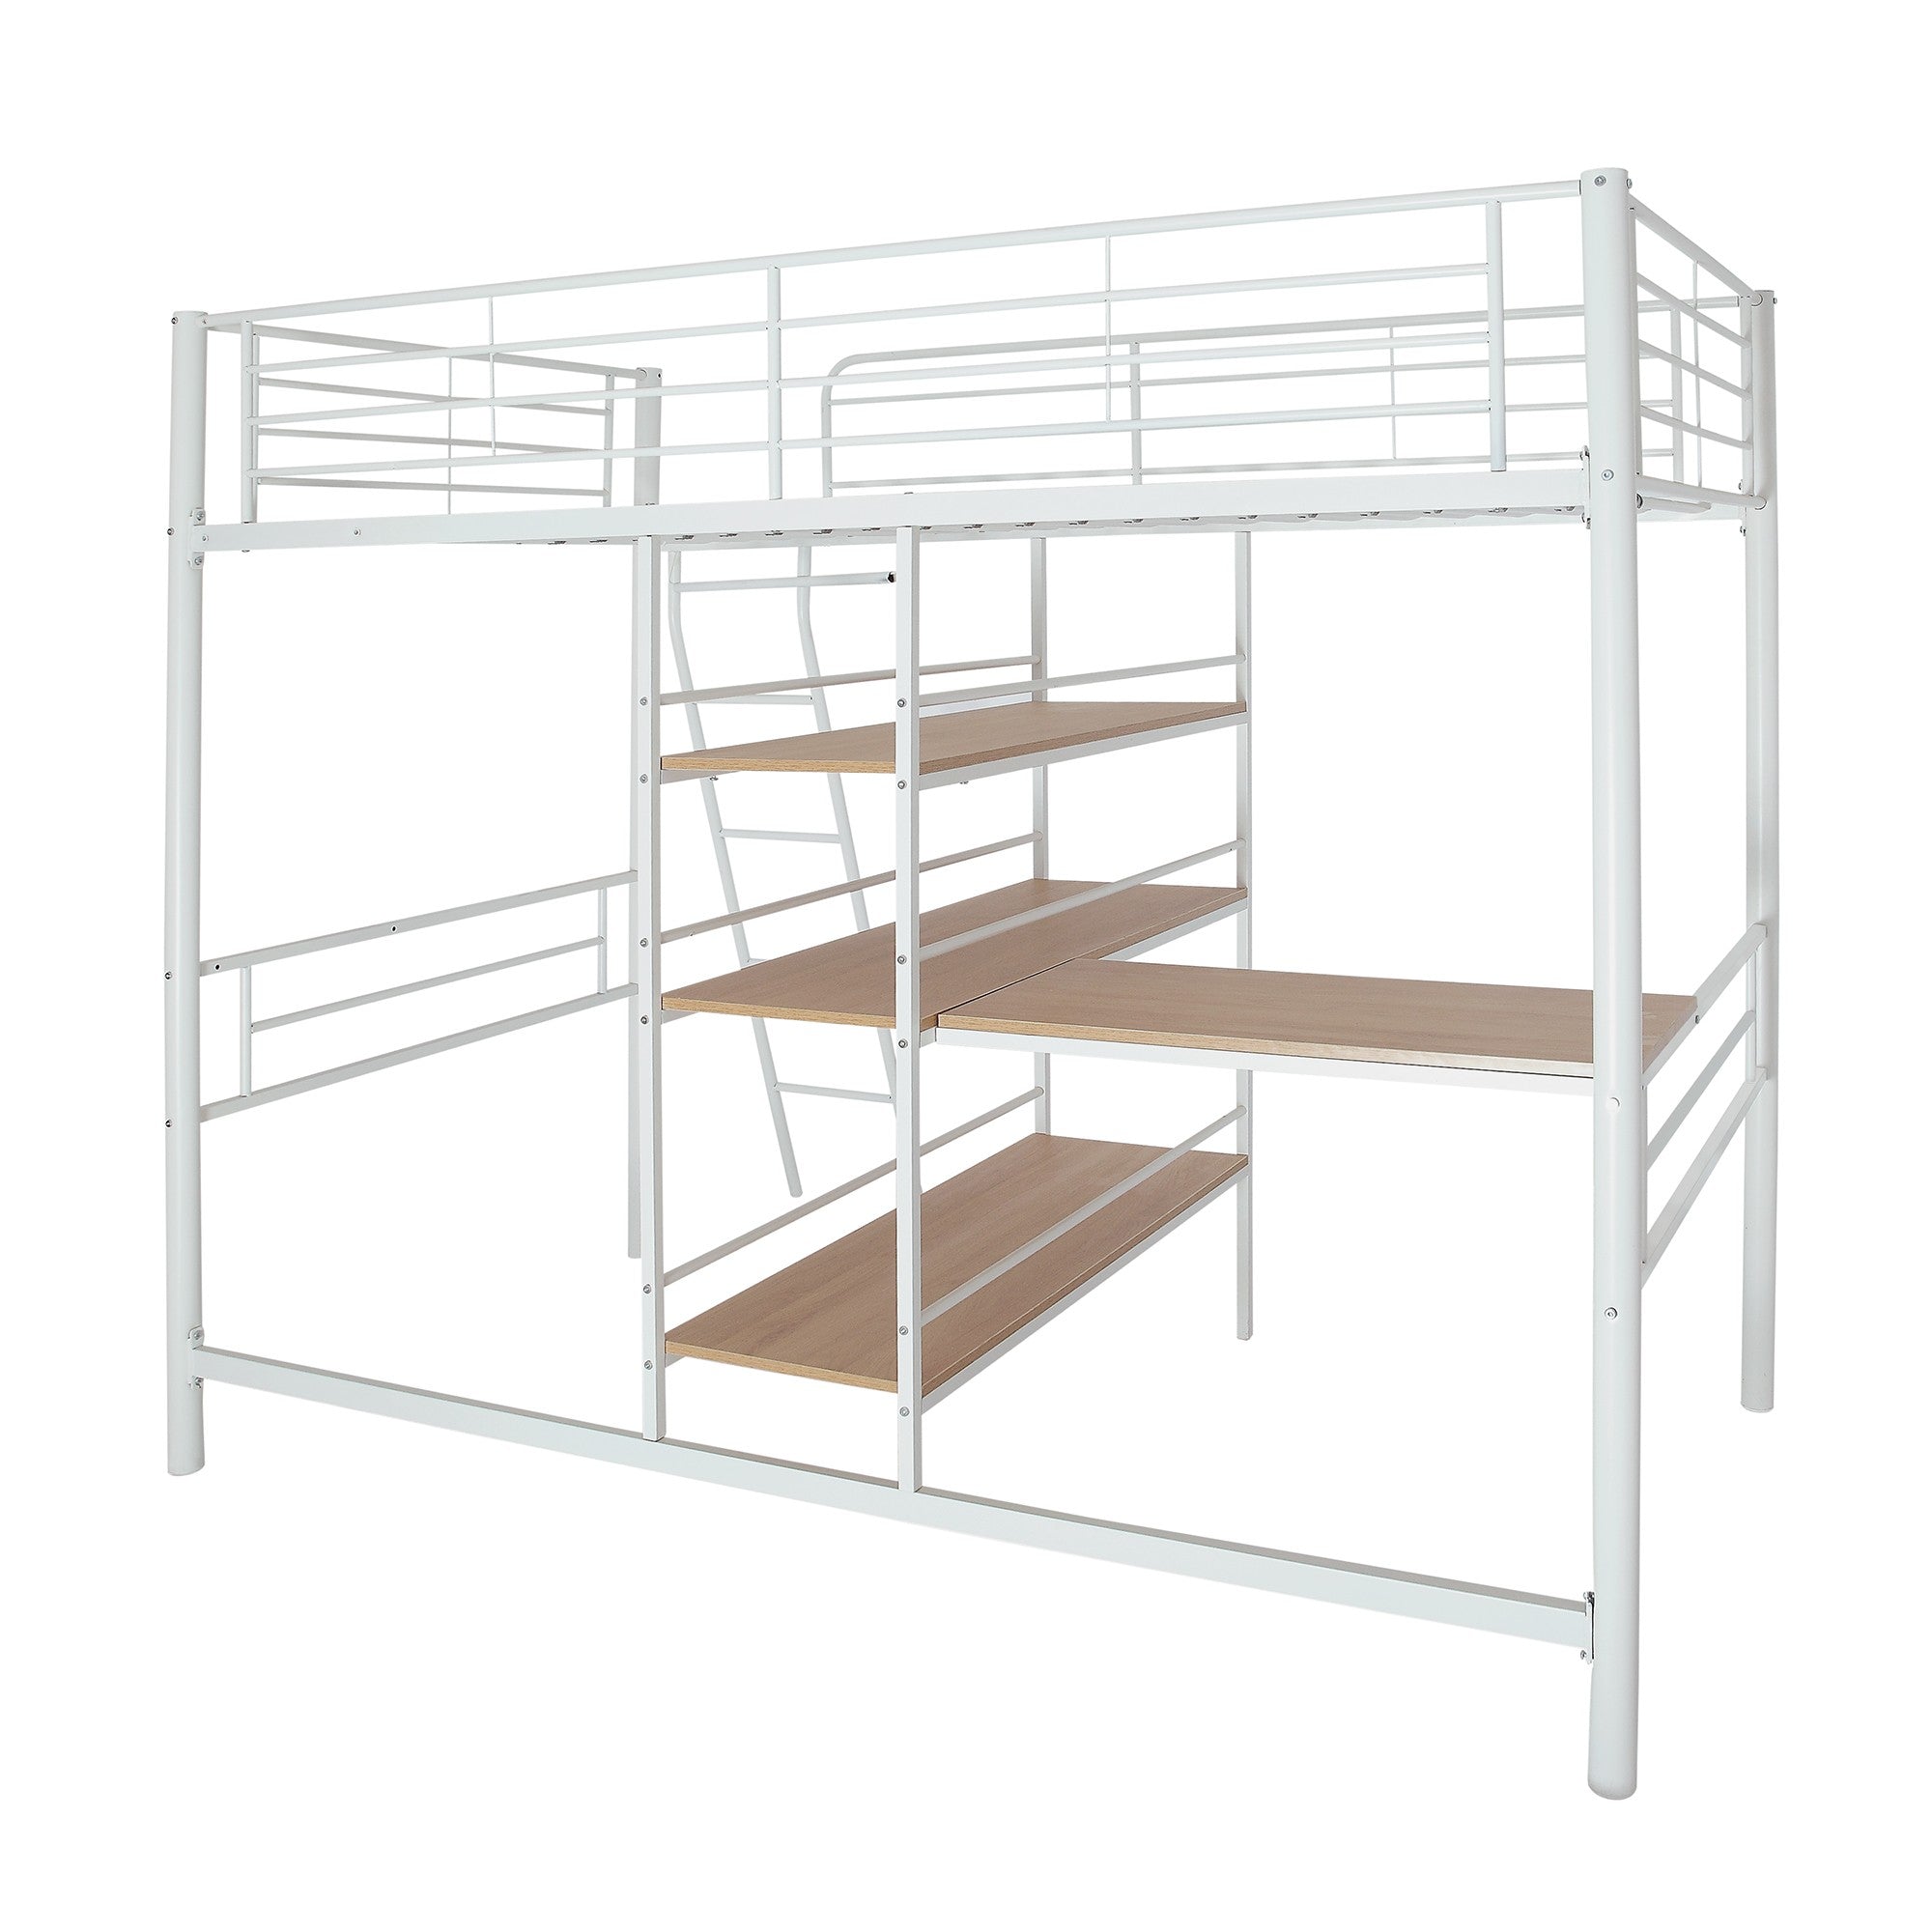 White Twin Size Metal Loft Bed with Built in Wooden Shelves and Desk